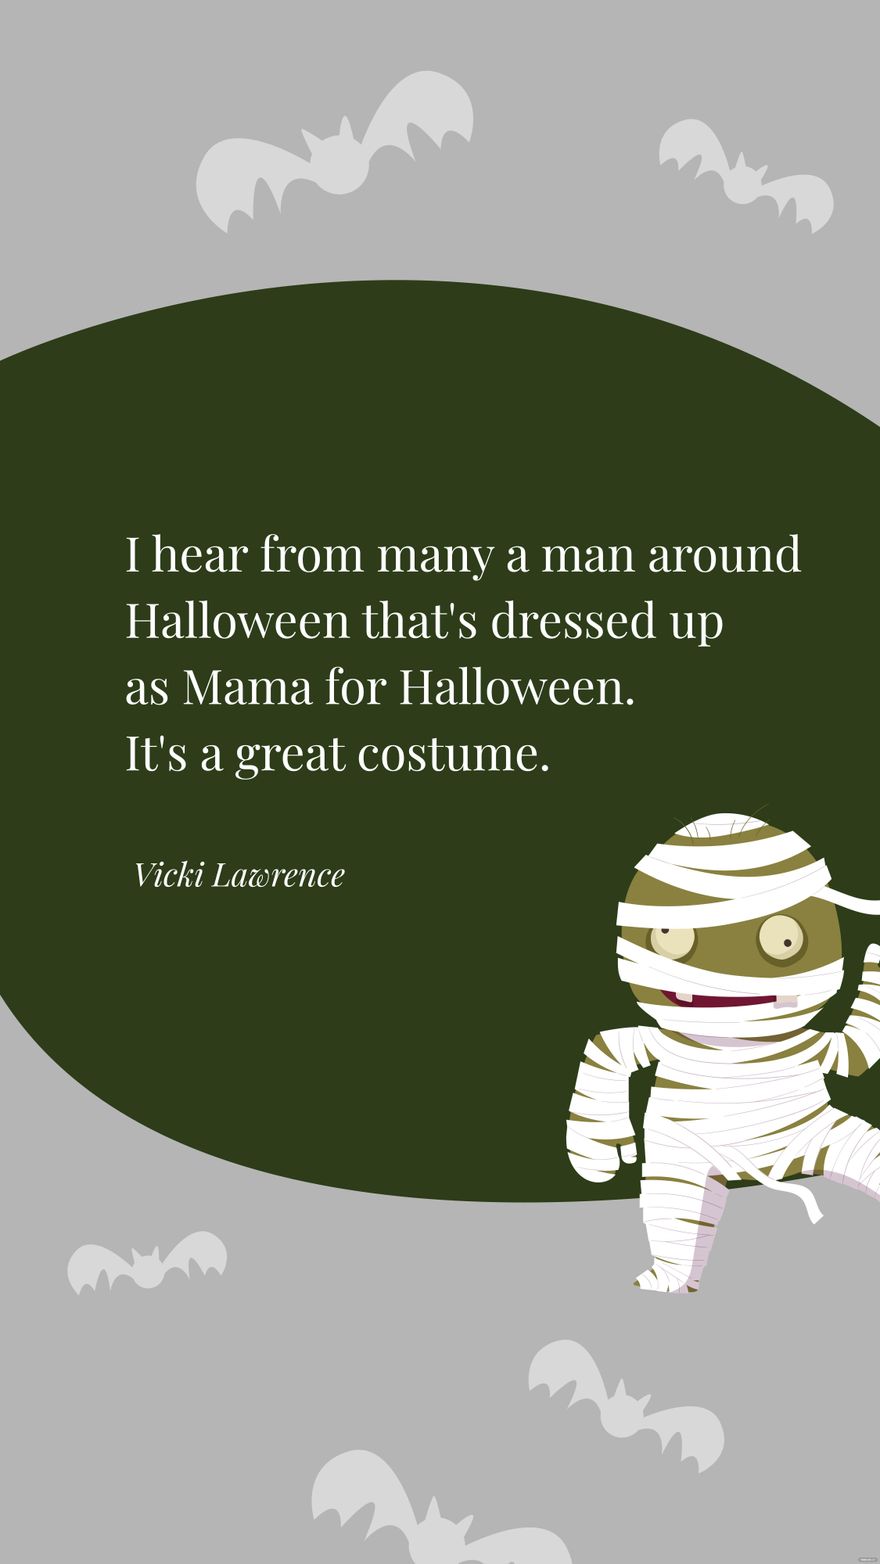 Vicki Lawrence- I hear from many a man around Halloween that's dressed up as Mama for Halloween. It's a great costume. 